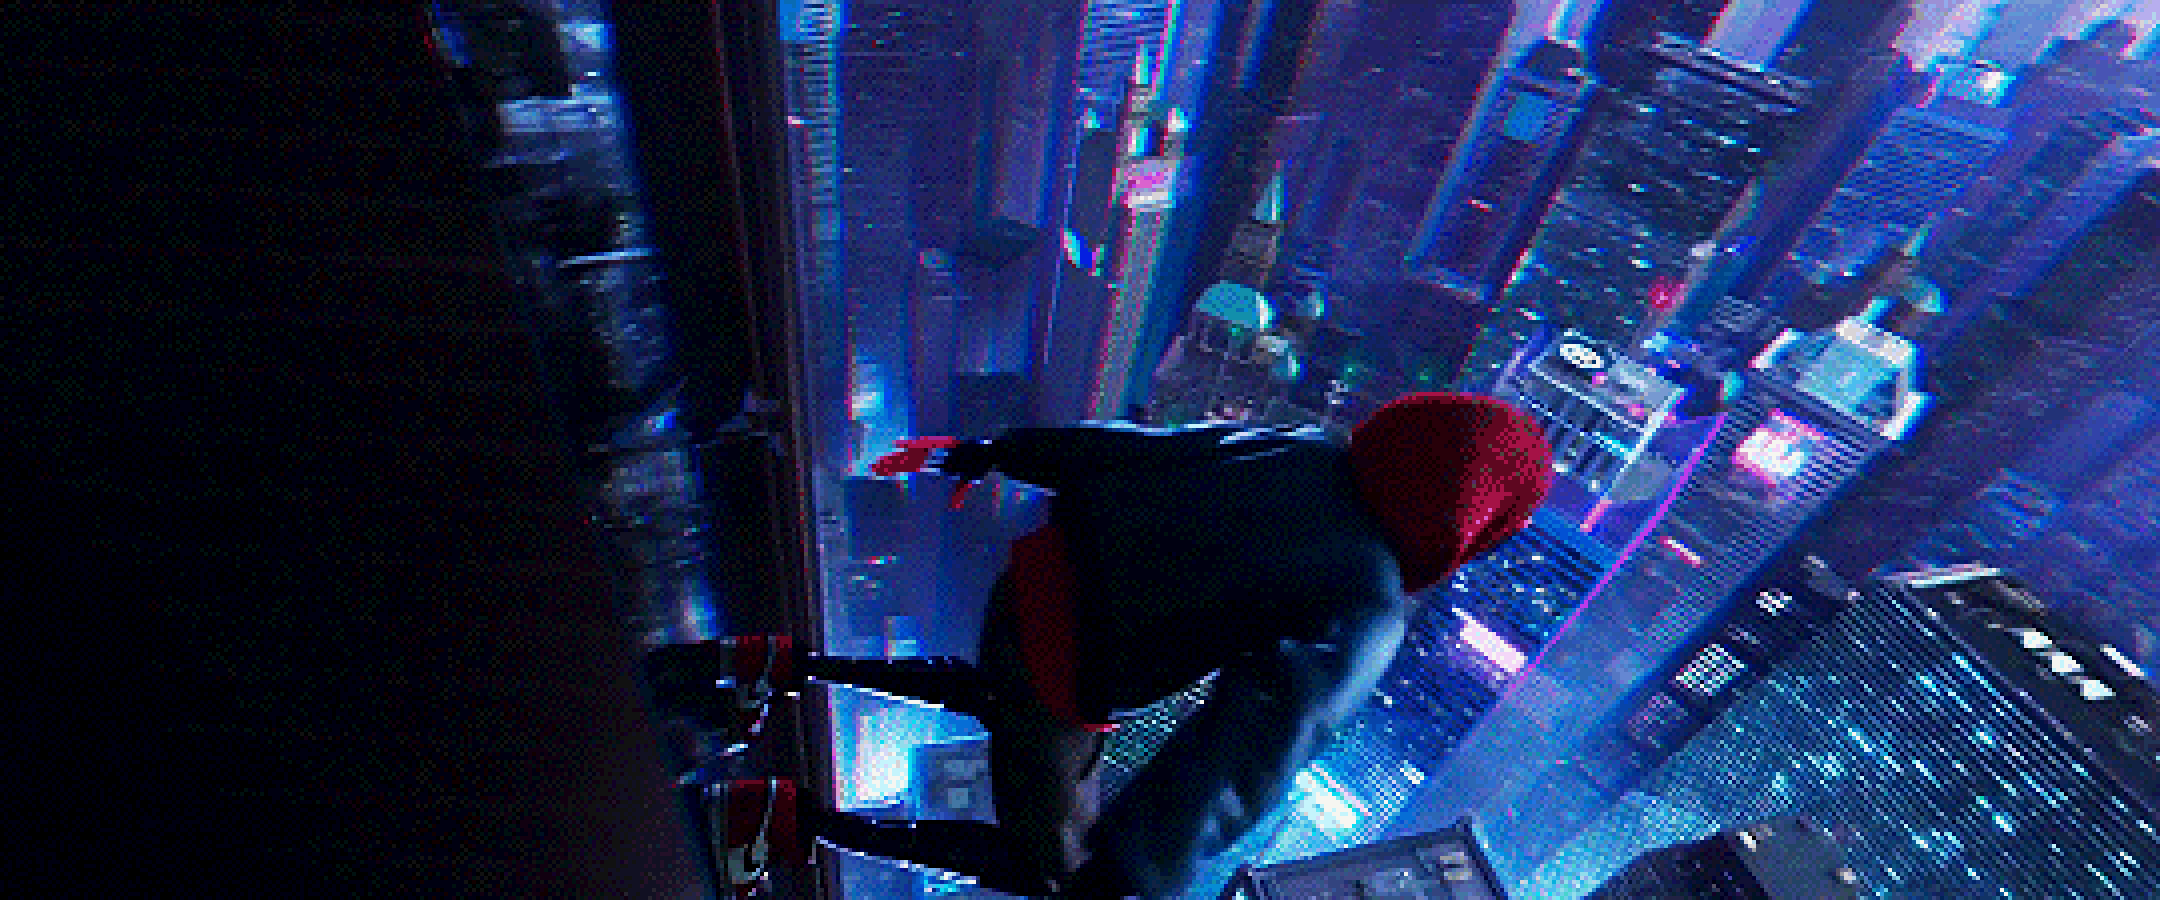 Miles Morales jumping from building — scene from the movie “Spiderman: Into the Spider-Verse”